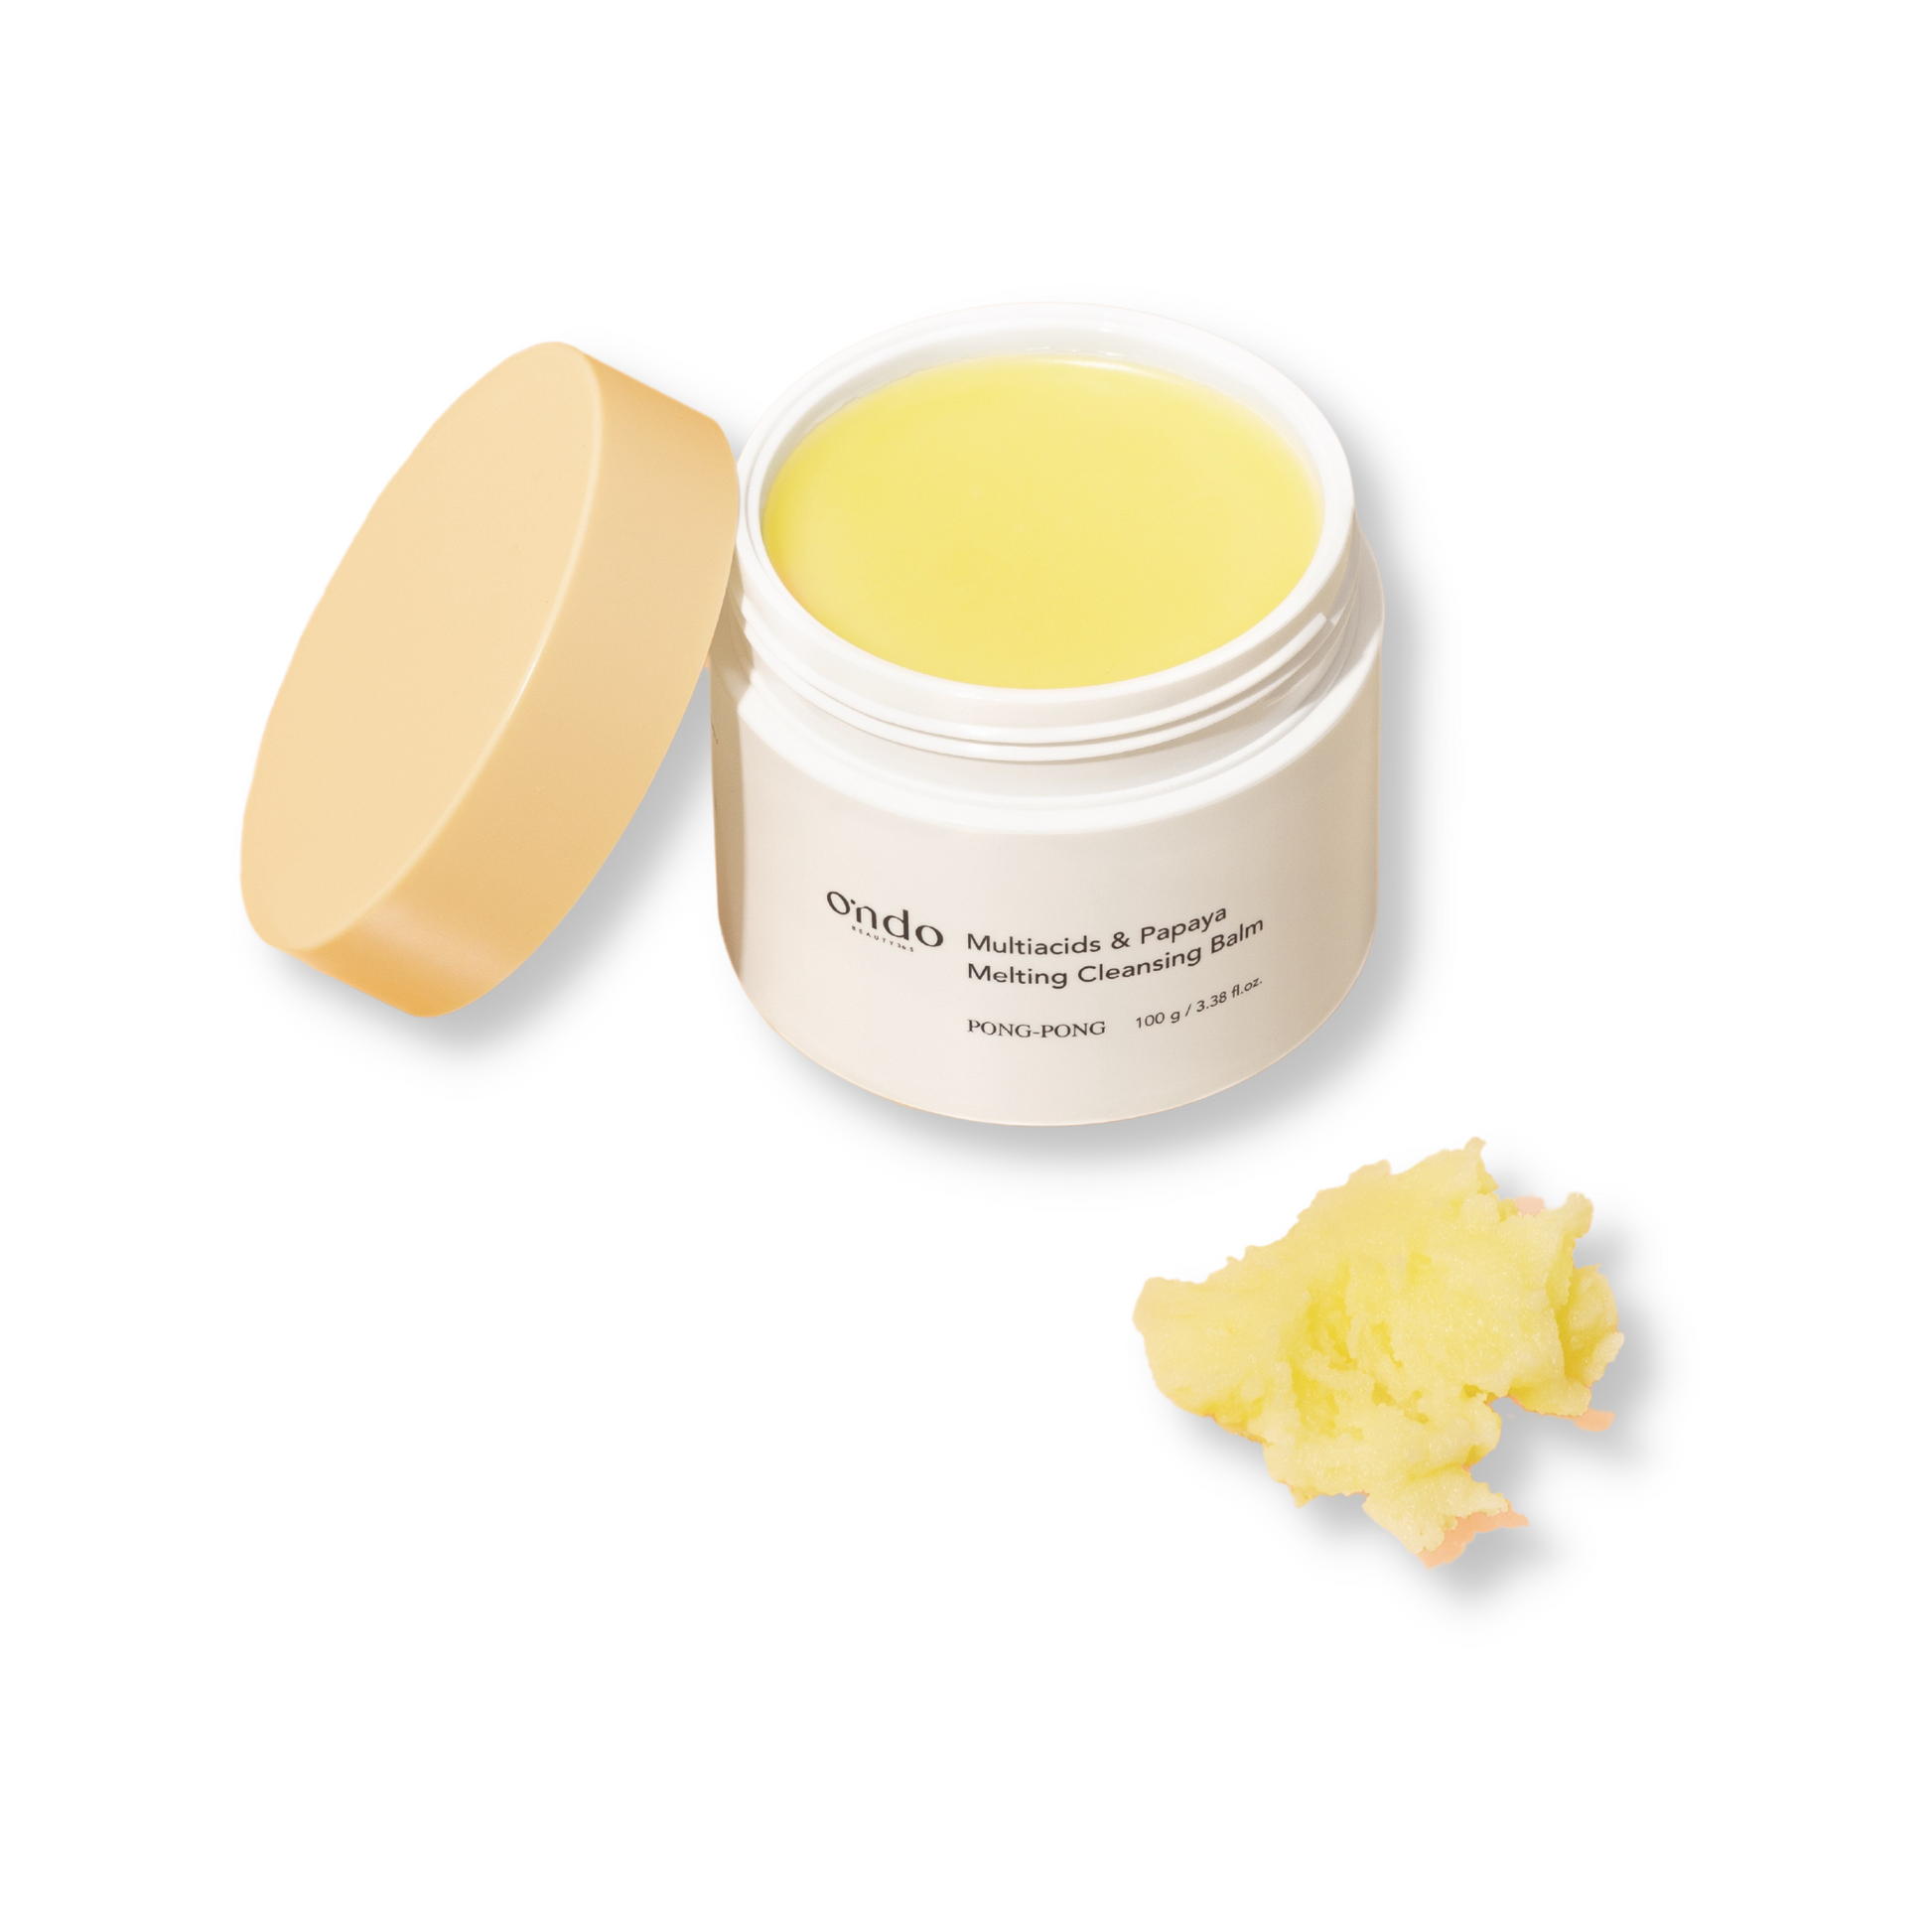 Cleansing balm, made from botanical oils, gently yet extremely well removes makeup, sebum and skin impurities.